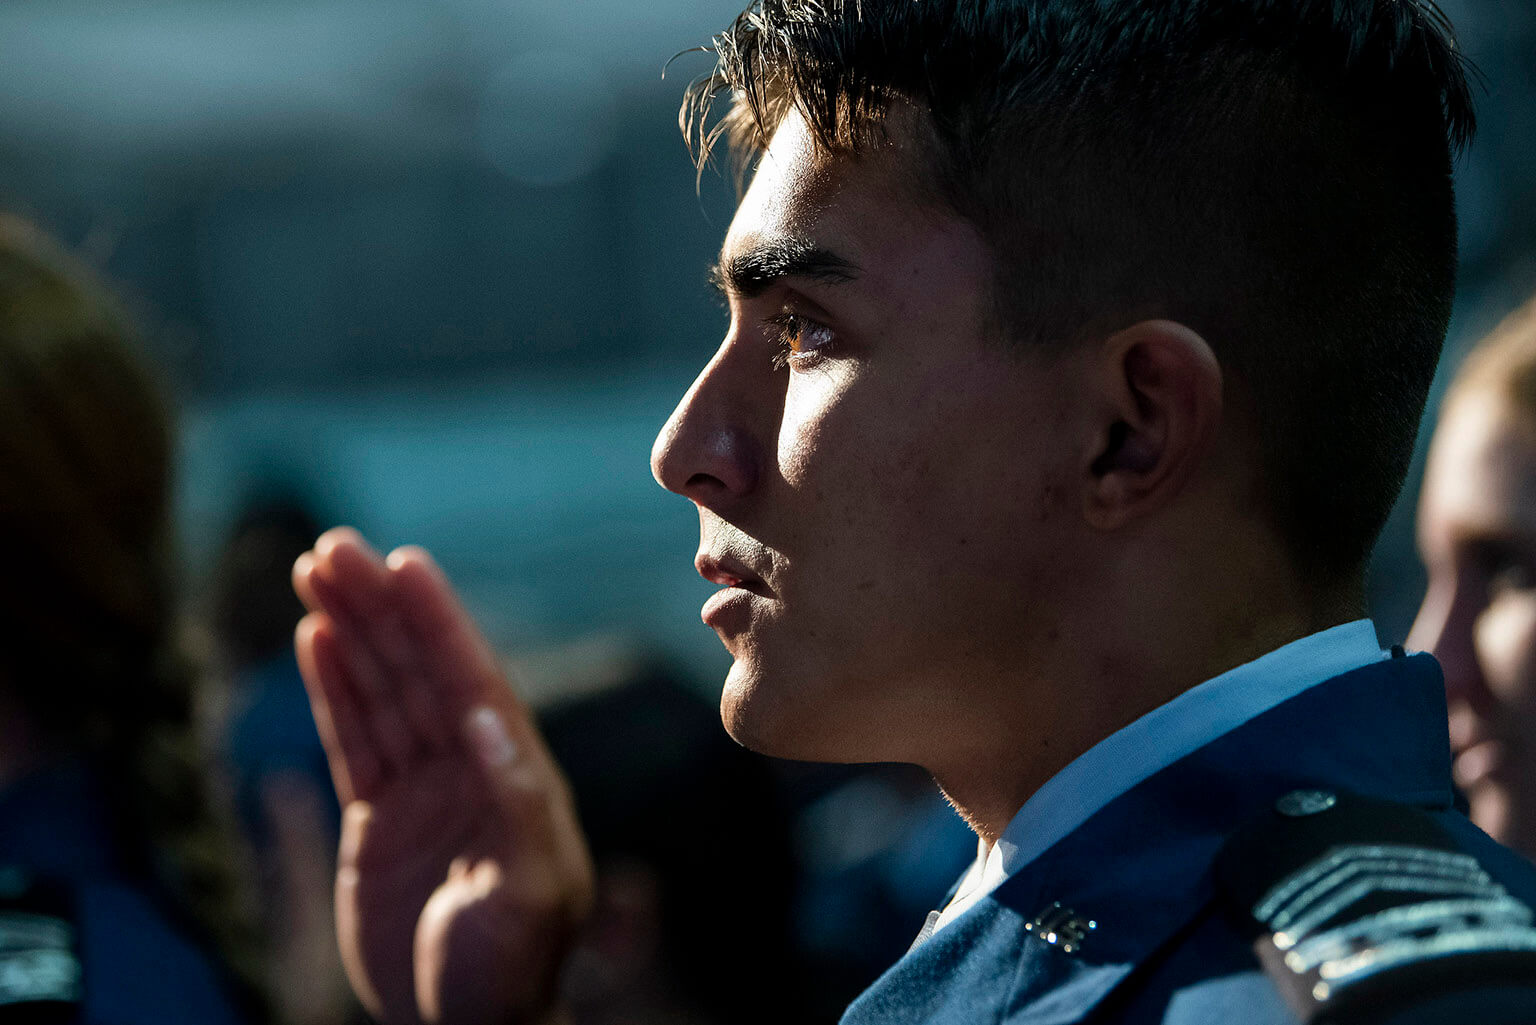 Cadet taking the military oath.